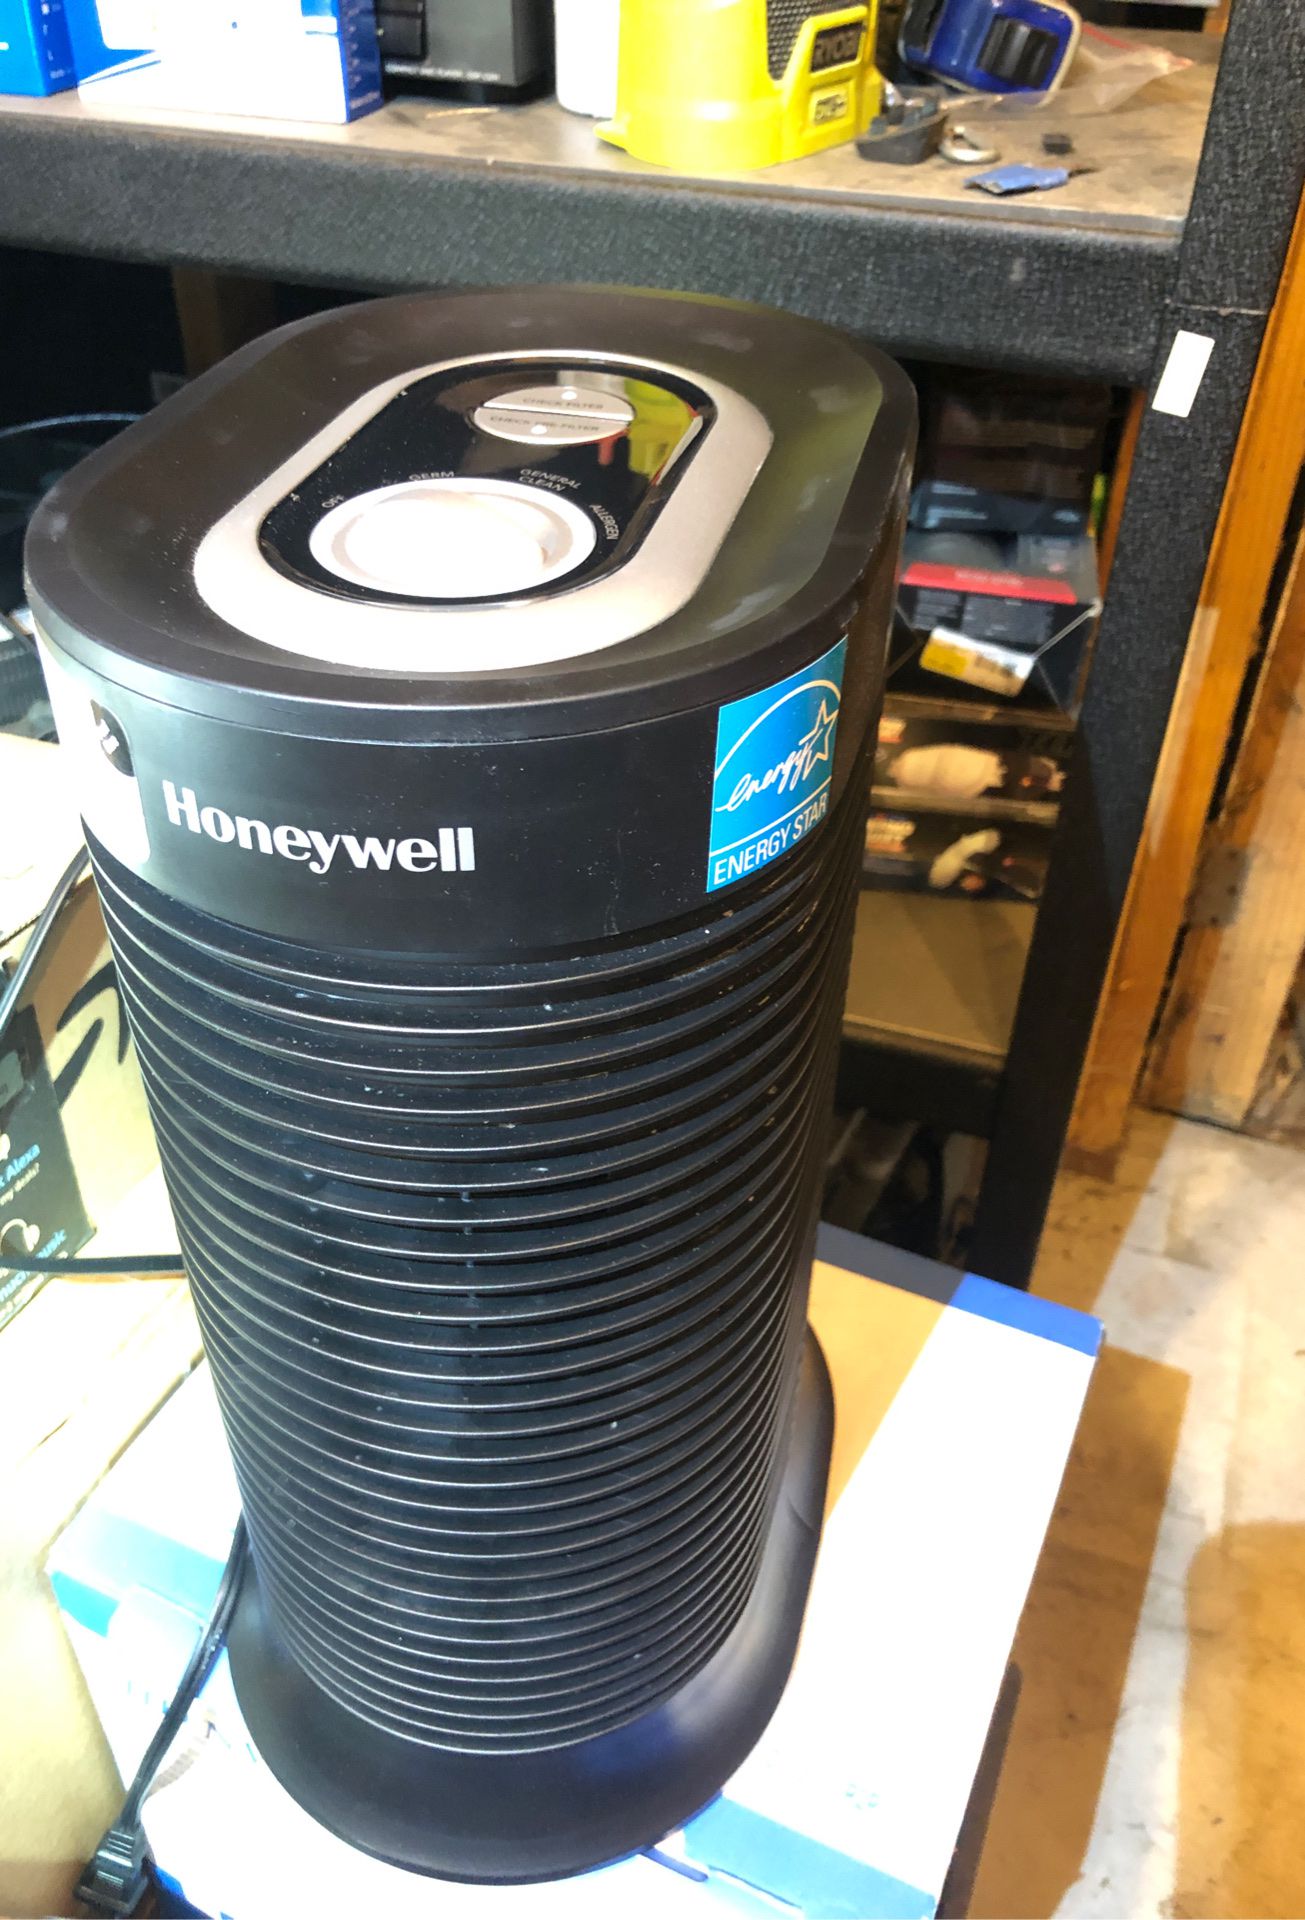 Honeywell True HEPA Compact Tower Air Purifier With Allergen Remover, HPA060